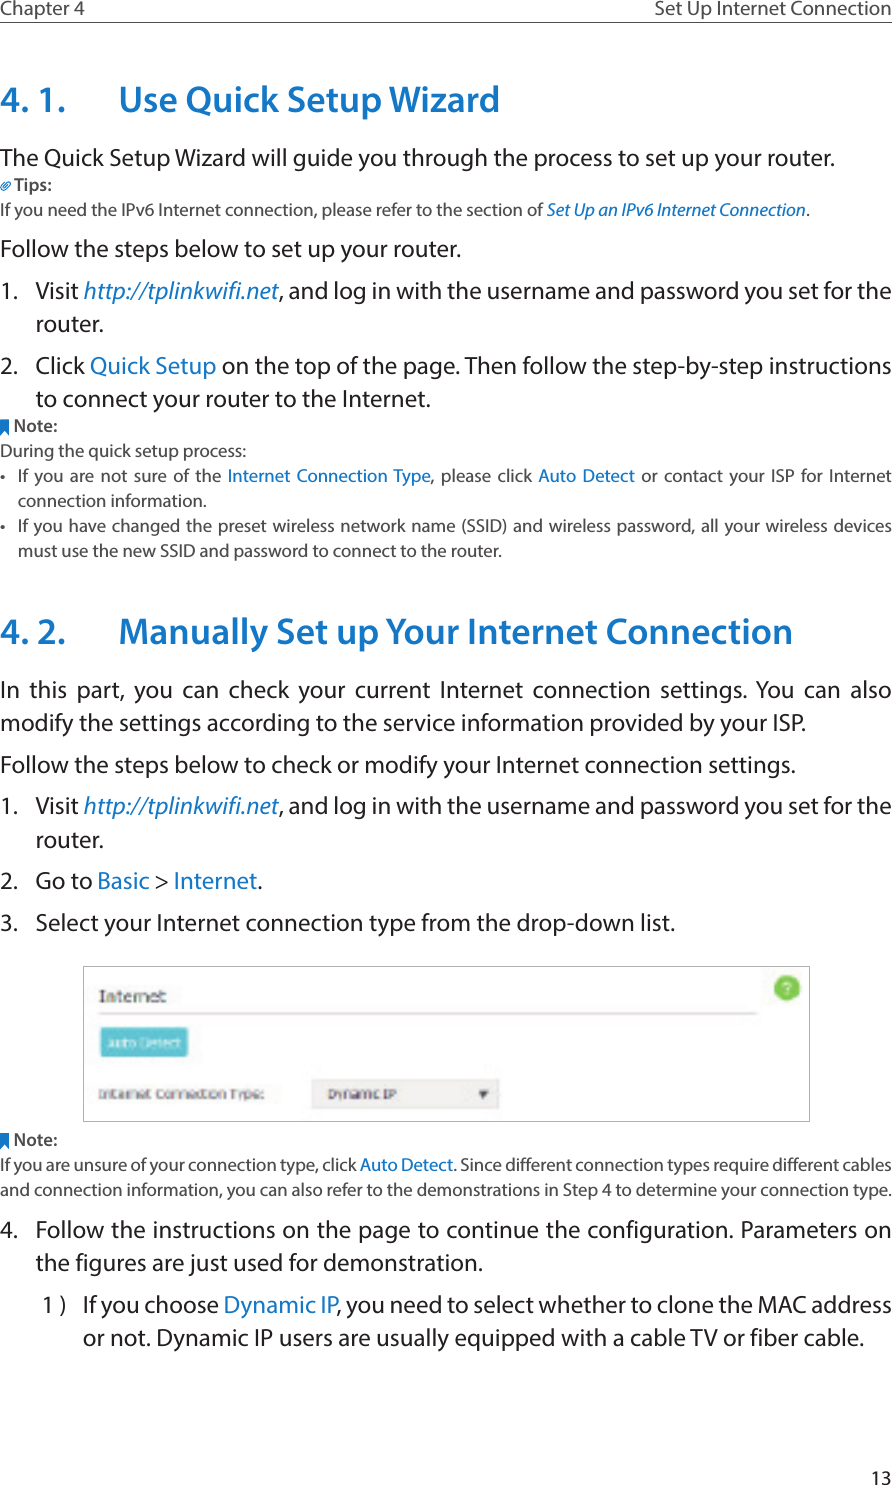 13Chapter 4 Set Up Internet Connection4. 1.  Use Quick Setup WizardThe Quick Setup Wizard will guide you through the process to set up your router.Tips:If you need the IPv6 Internet connection, please refer to the section of Set Up an IPv6 Internet Connection.Follow the steps below to set up your router.1.  Visit http://tplinkwifi.net, and log in with the username and password you set for the router.2.  Click Quick Setup on the top of the page. Then follow the step-by-step instructions to connect your router to the Internet.Note:During the quick setup process:•  If you are not sure of the Internet Connection Type, please click Auto Detect or contact your ISP for Internet connection information.•  If you have changed the preset wireless network name (SSID) and wireless password, all your wireless devices must use the new SSID and password to connect to the router.4. 2.  Manually Set up Your Internet Connection In this part, you can check your current Internet connection settings. You can also modify the settings according to the service information provided by your ISP.Follow the steps below to check or modify your Internet connection settings.1.  Visit http://tplinkwifi.net, and log in with the username and password you set for the router.2.  Go to Basic &gt; Internet.3.  Select your Internet connection type from the drop-down list. Note:If you are unsure of your connection type, click Auto Detect. Since different connection types require different cables and connection information, you can also refer to the demonstrations in Step 4 to determine your connection type.4.  Follow the instructions on the page to continue the configuration. Parameters on the figures are just used for demonstration. 1 )  If you choose Dynamic IP, you need to select whether to clone the MAC address or not. Dynamic IP users are usually equipped with a cable TV or fiber cable.